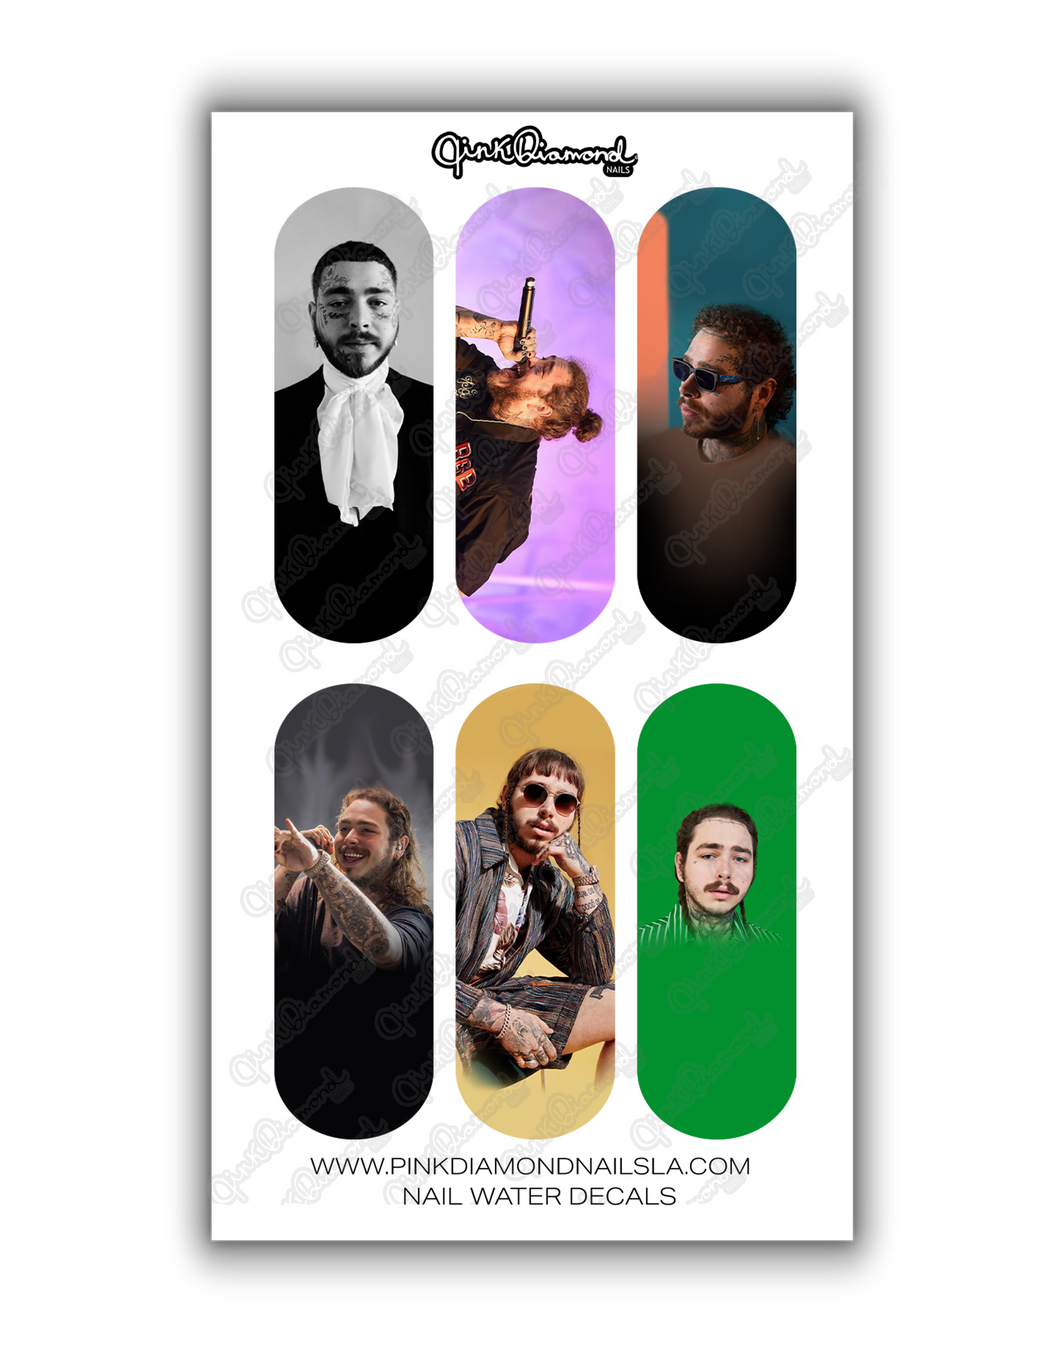 Nail water decals - XL Post Malone mix #1